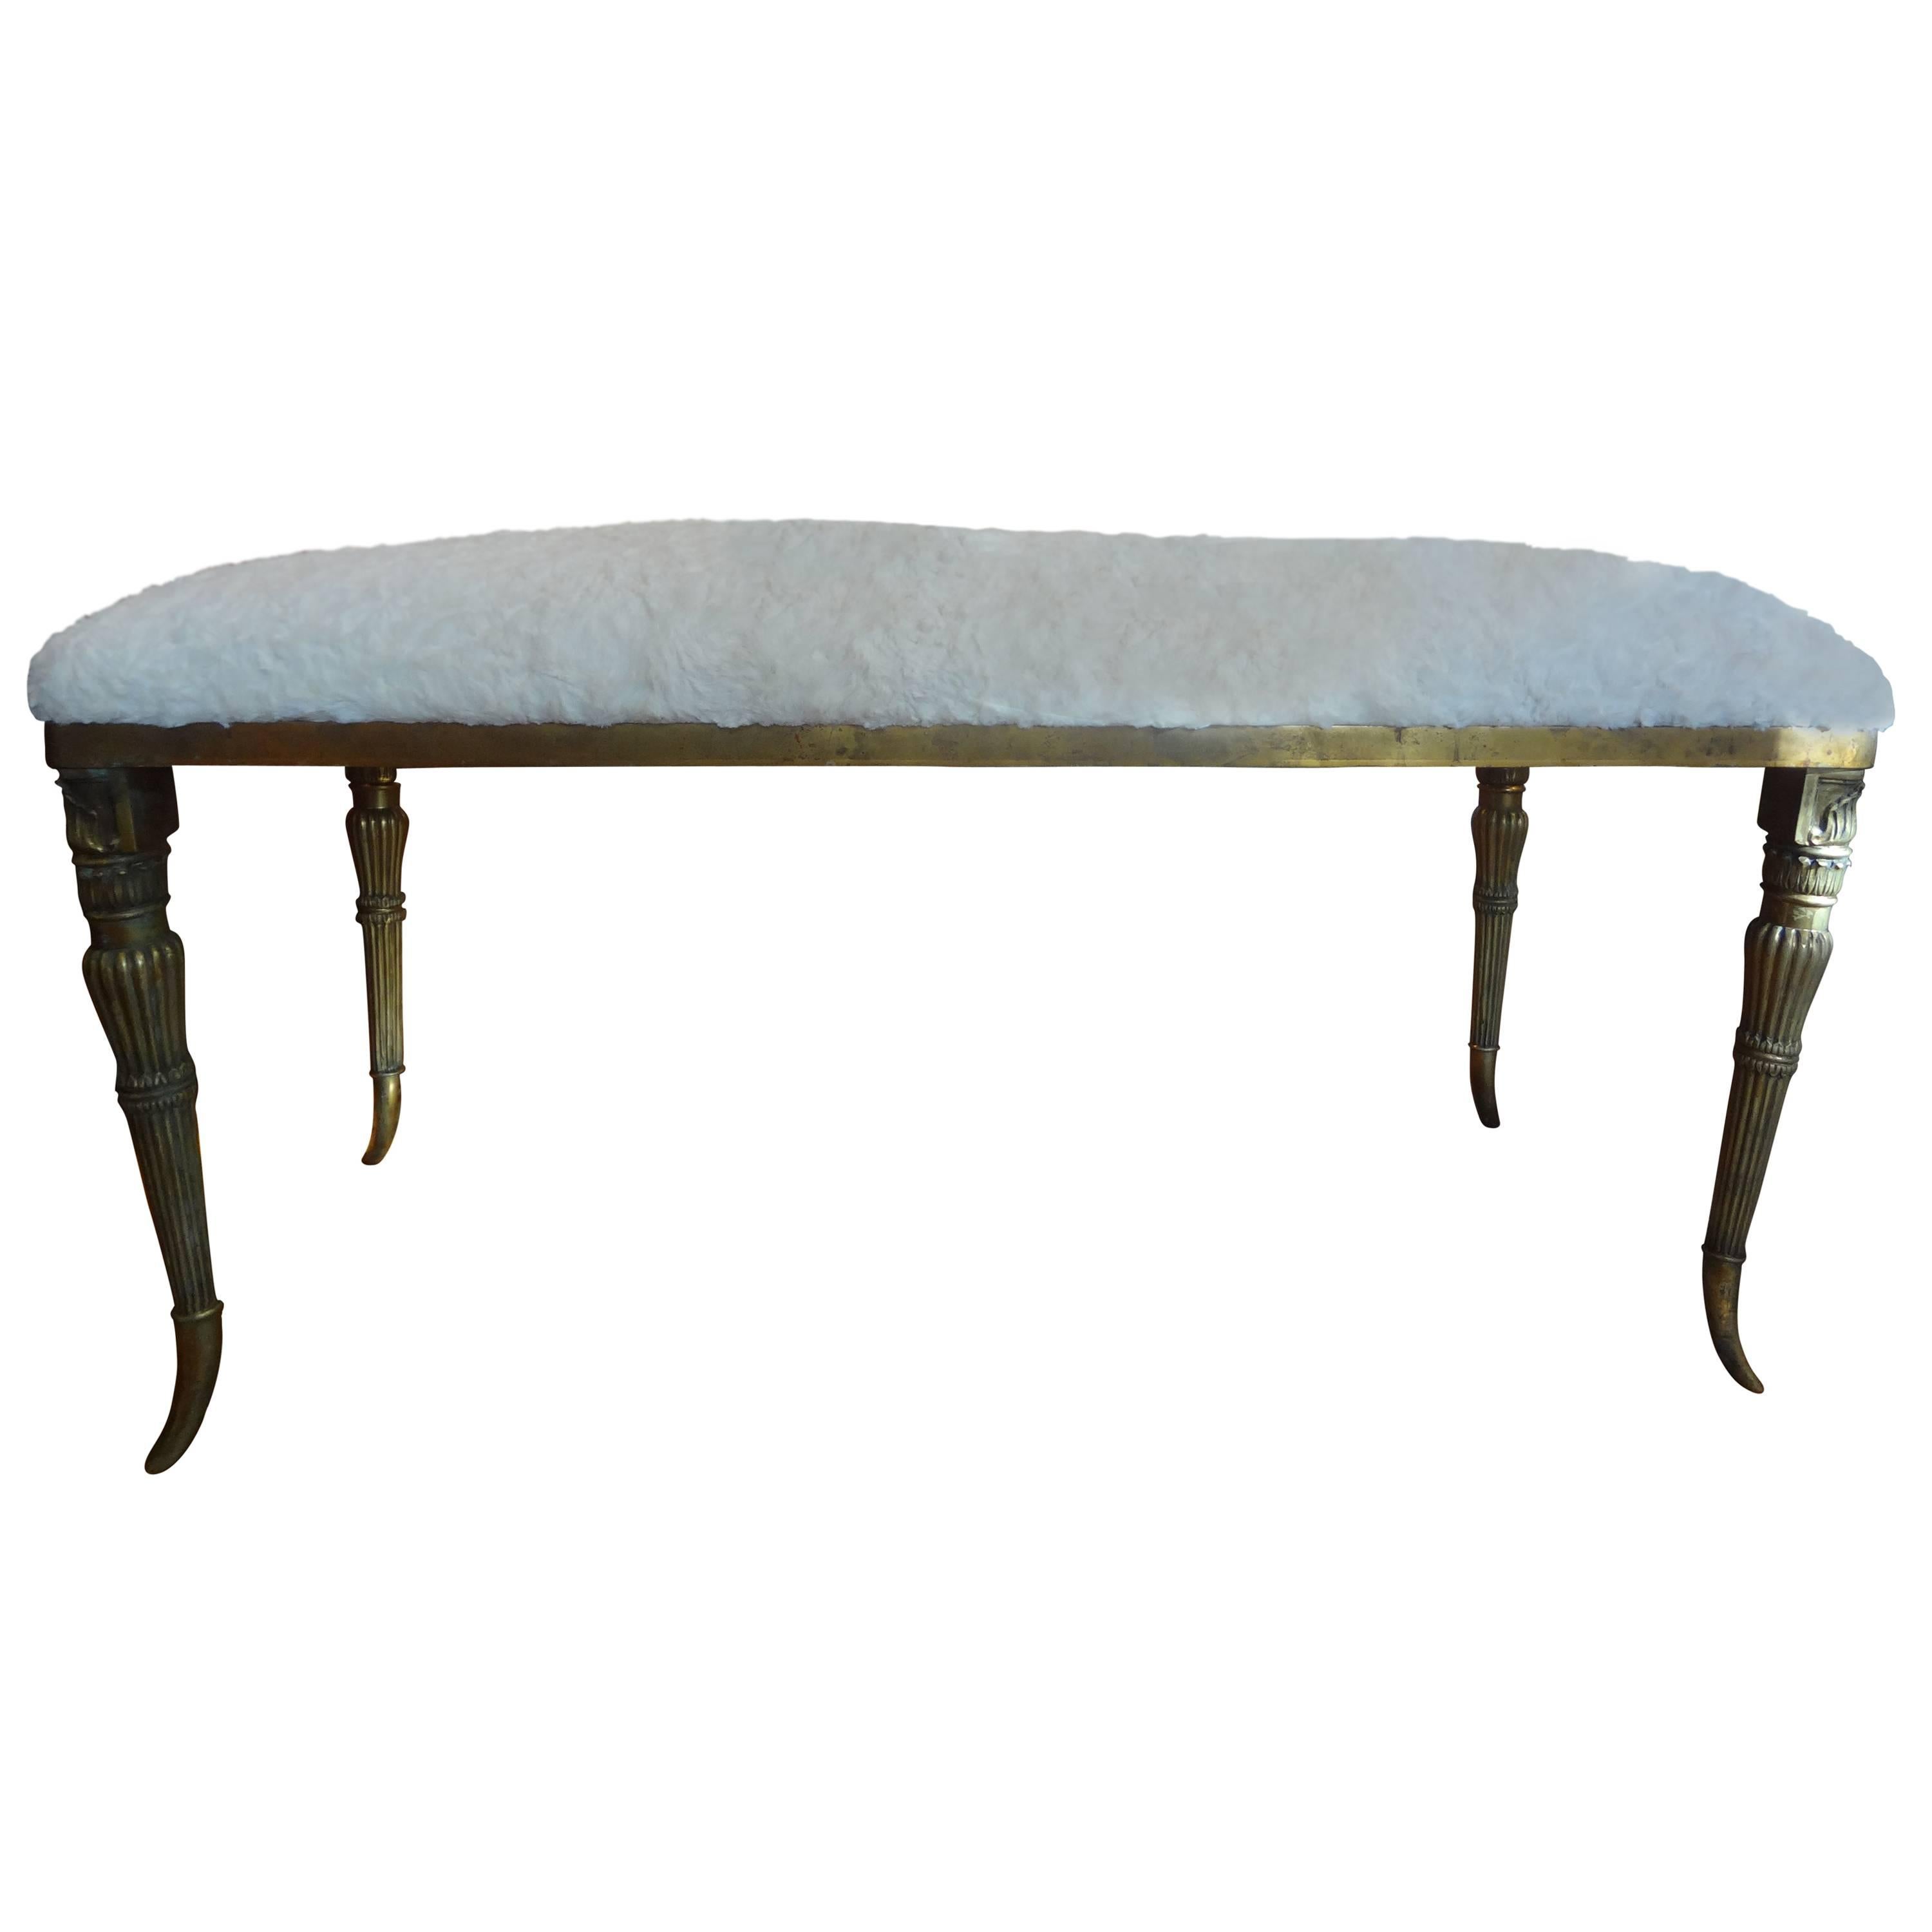 Italian Gio Ponti Inspired Neoclassical Style Brass Bench from Milan